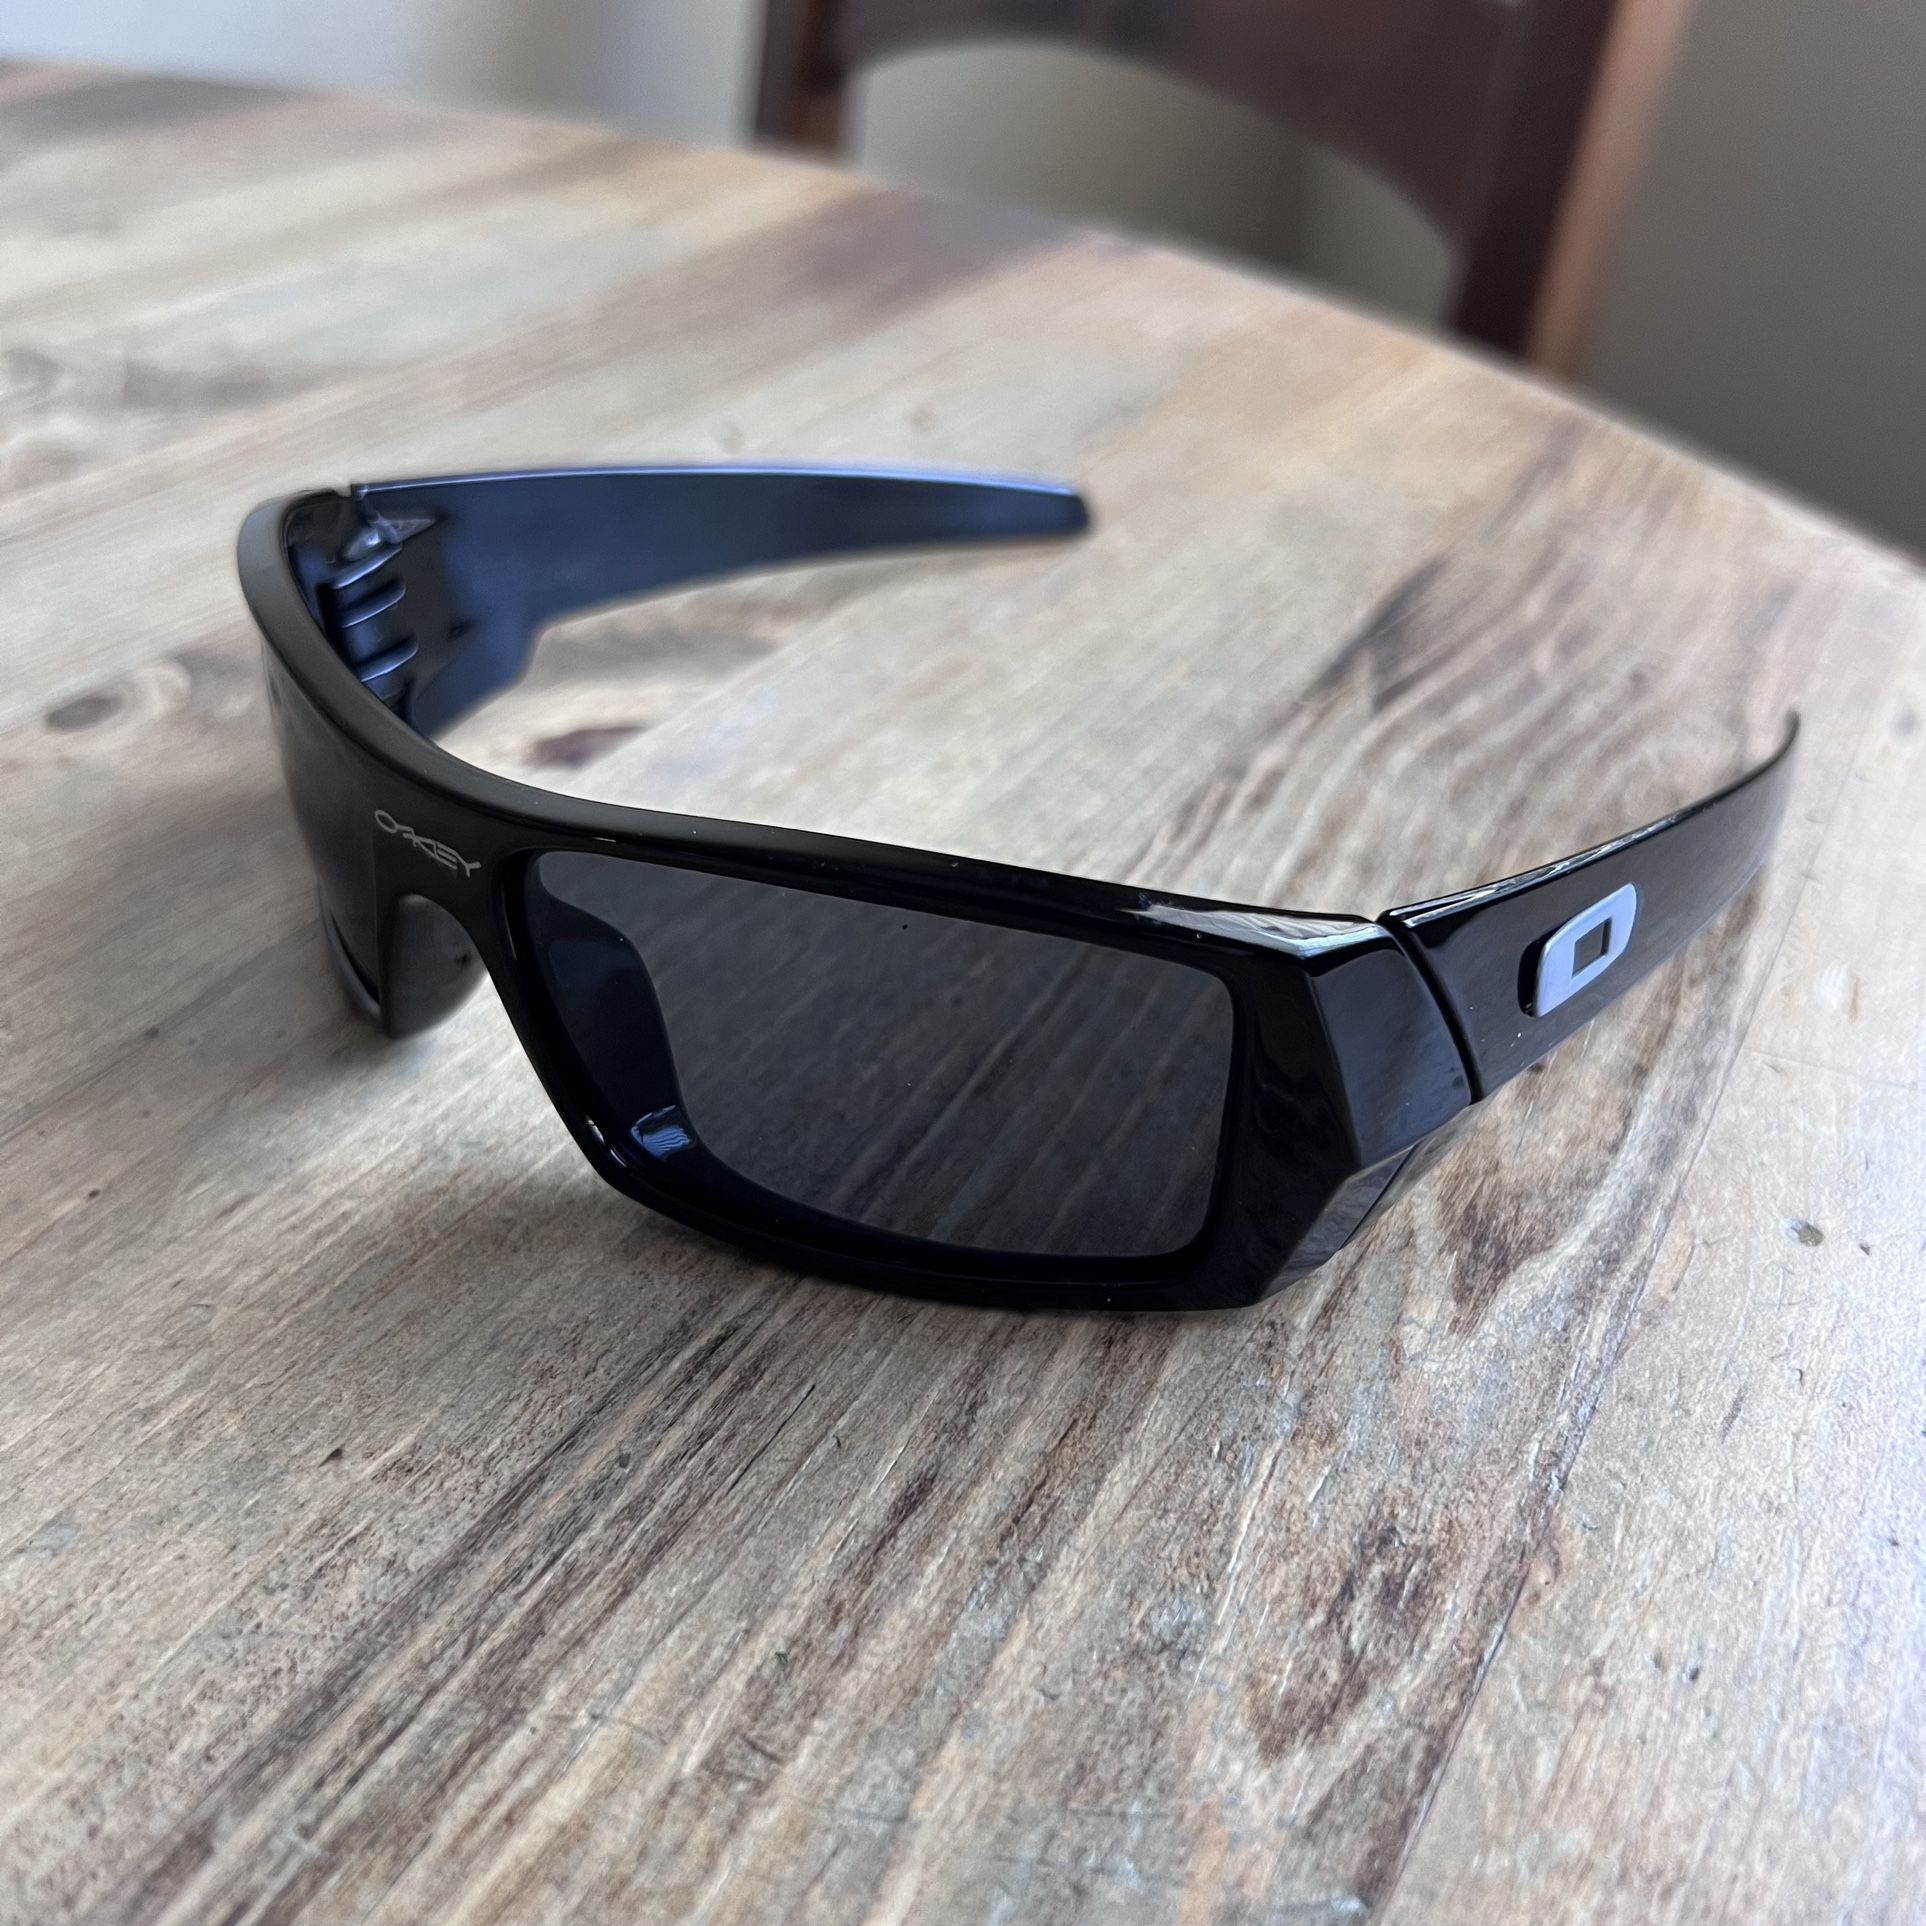 New oakley style sunglasses No damage Pick up Costa mesa More glasses  available for Sale in Newport Beach, CA - OfferUp